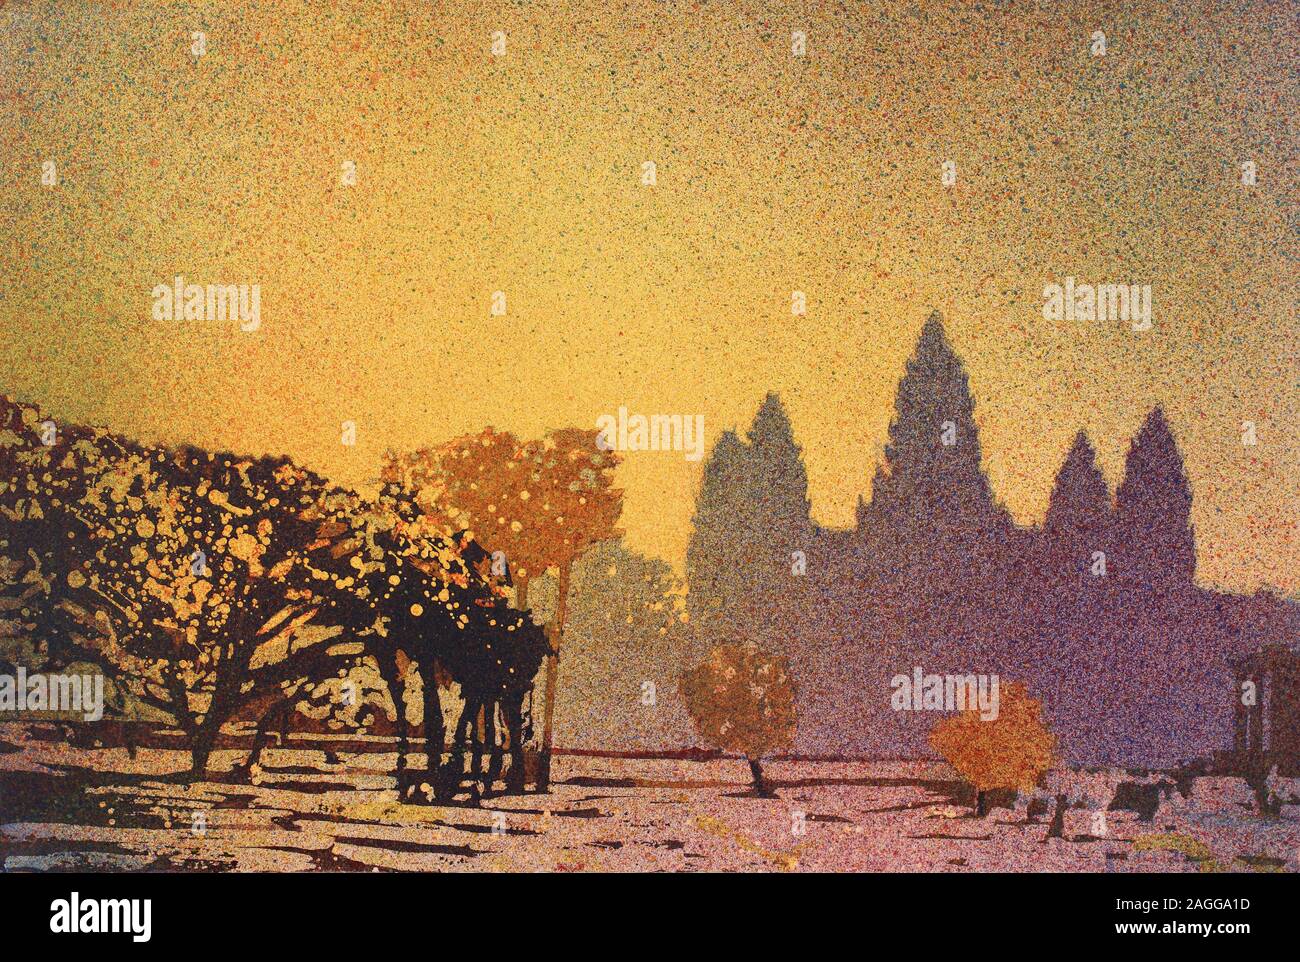 Silhouette of 12th century ruins of UNESCO World Heritage ruins of Angkor Wat- near Siem Reap, Cambodia. Stock Photo